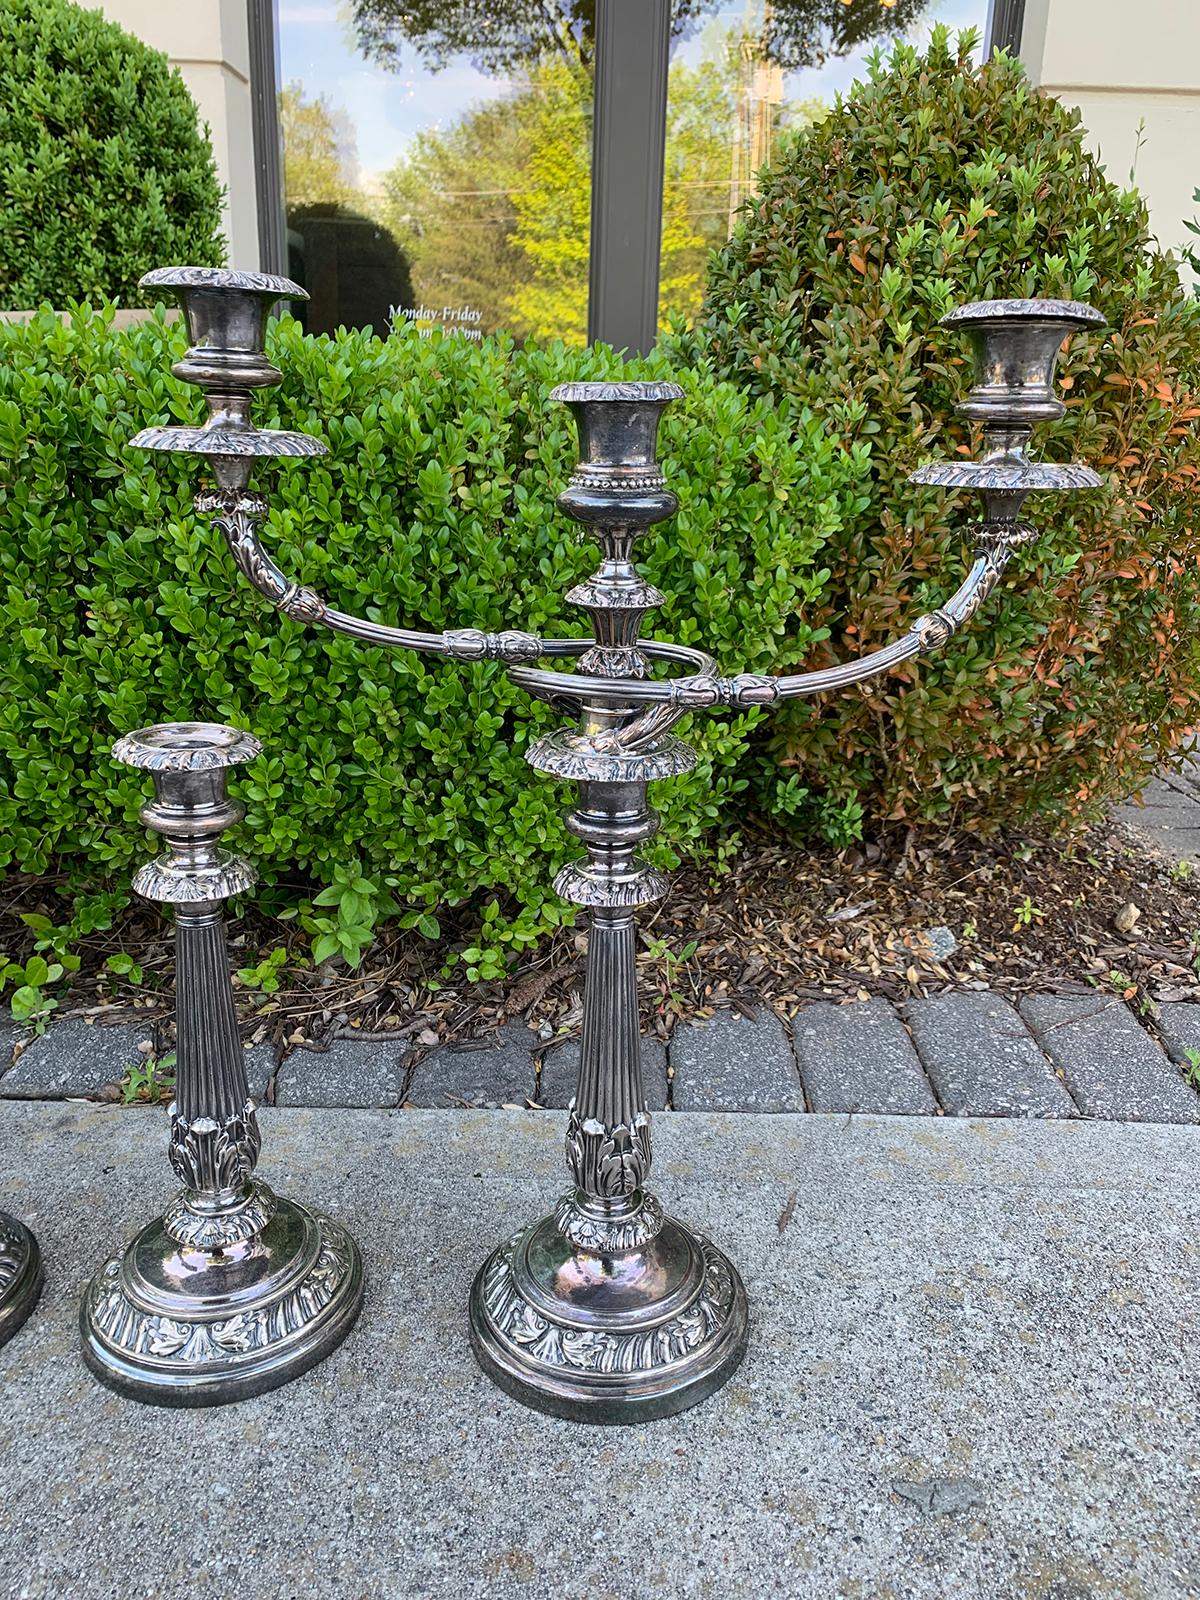 Set of Four Matthew Boulton Sheffield Plate Candlesticks and Candelabras, Marked 7